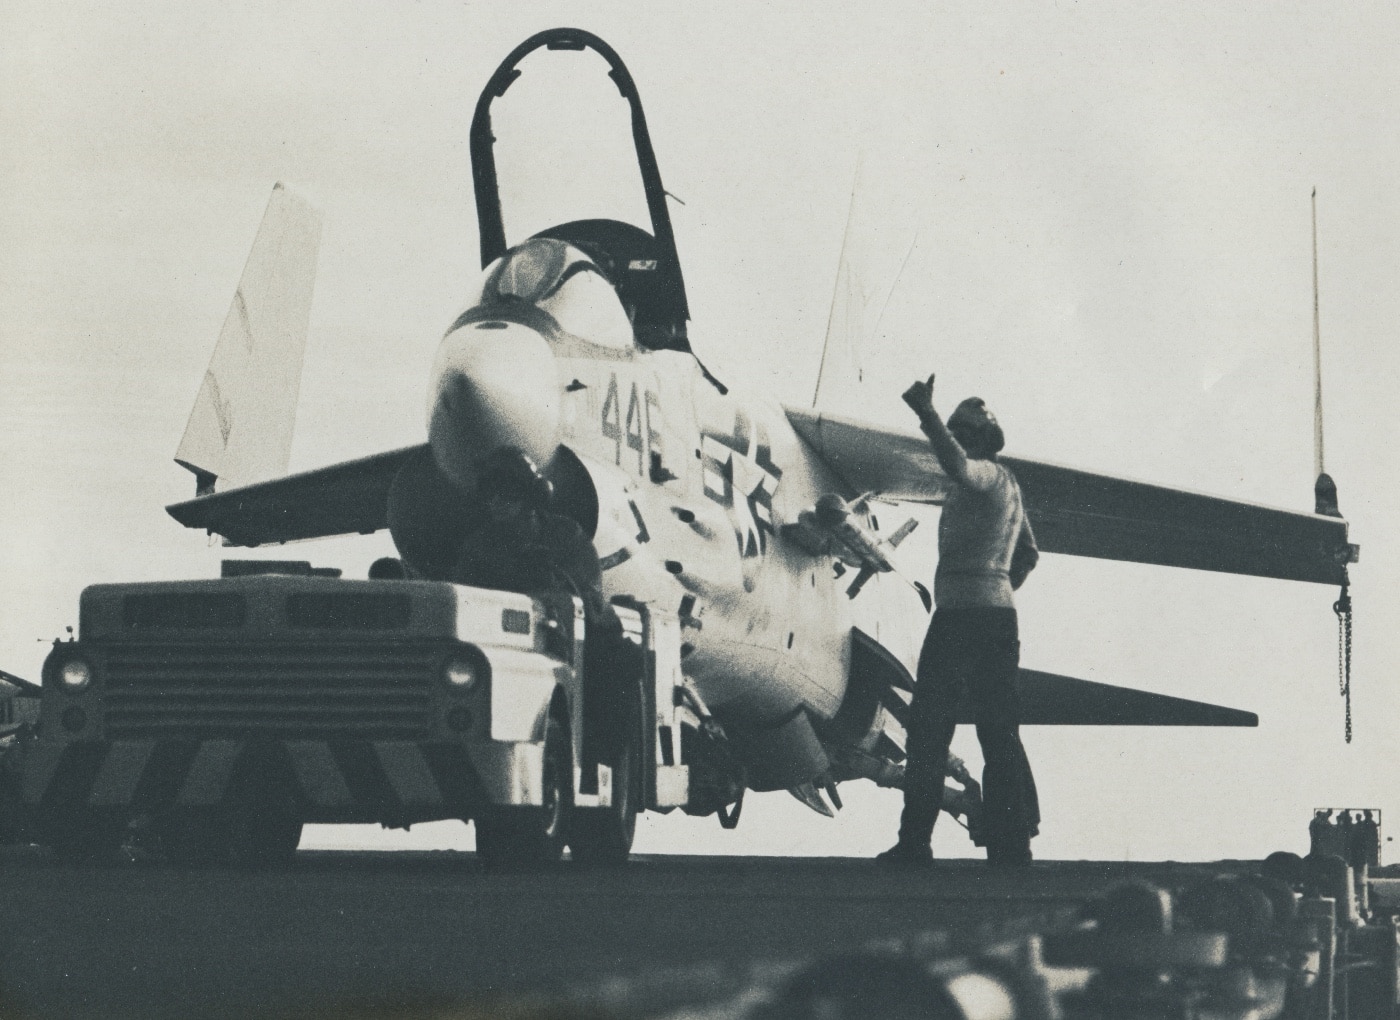 In this photo, U.S. Navy sailors reposition an F-8 Crusader on the deck of an aircraft carrier. The Crusader's prominent turbojet engine is plainly visible. Also shown are the variable-incidence wings that made the plane flyable in naval aviation. The planes are memorialized in the National Air and Space Museum and the USS Hornet museum. 